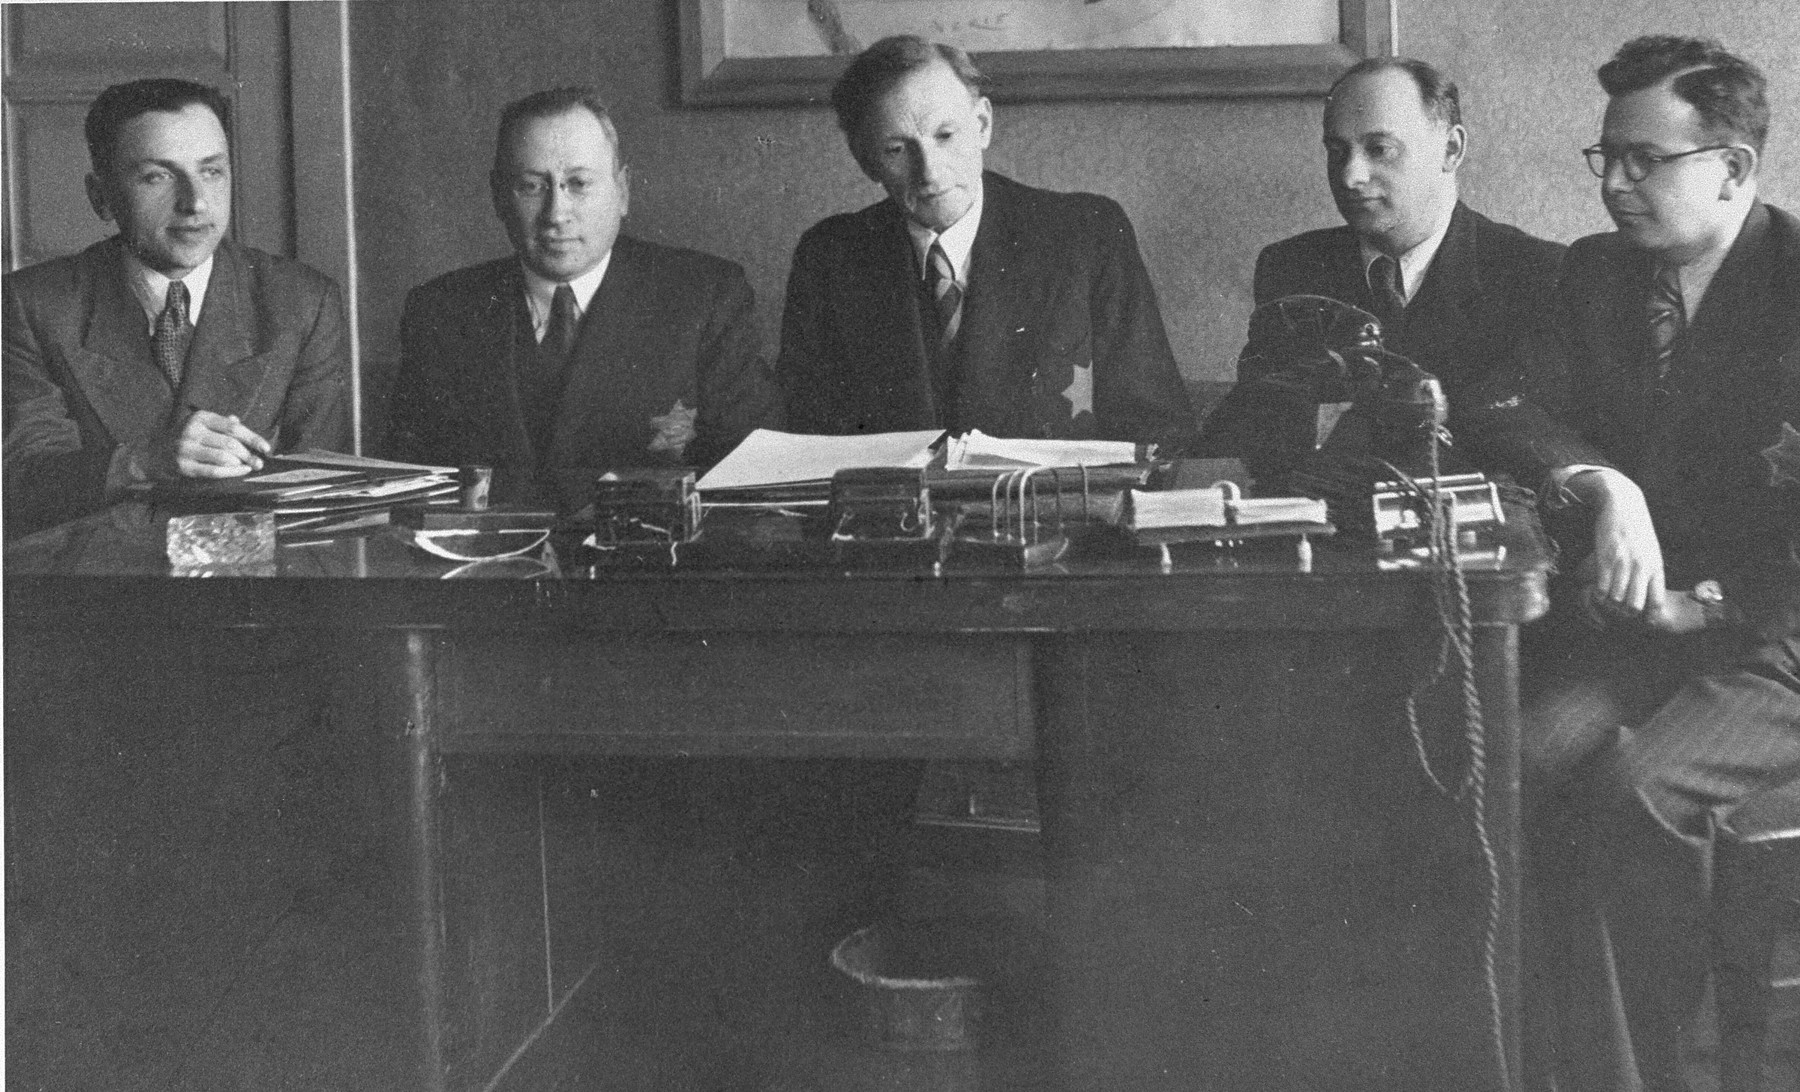 Members of the Kovno Altestenrat (Council of the Elders).

Left to right are Avraham Tory secretary; Leib Garfunkel, deputy chairman; Elkhanan Elkes, chairman; Yakov Goldberg, head of the Labor Office and Zvi Levin, advisor and link with the underground.